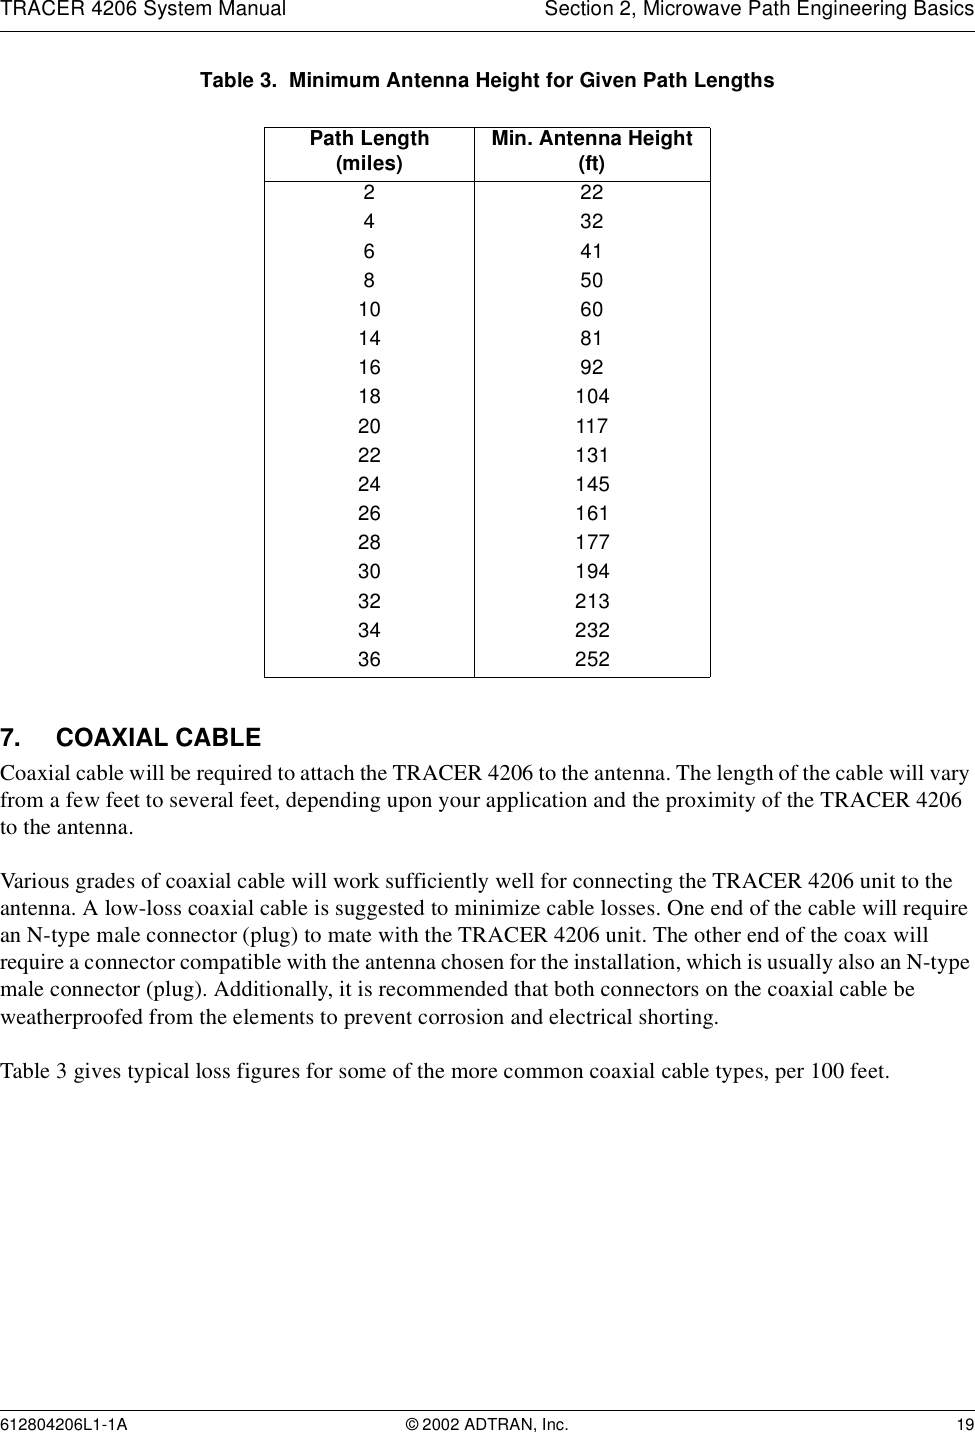 TRACER 4206 System Manual Section 2, Microwave Path Engineering Basics612804206L1-1A © 2002 ADTRAN, Inc. 19Table 3.  Minimum Antenna Height for Given Path Lengths7. COAXIAL CABLECoaxial cable will be required to attach the TRACER 4206 to the antenna. The length of the cable will vary from a few feet to several feet, depending upon your application and the proximity of the TRACER 4206 to the antenna.Various grades of coaxial cable will work sufficiently well for connecting the TRACER 4206 unit to the antenna. A low-loss coaxial cable is suggested to minimize cable losses. One end of the cable will require an N-type male connector (plug) to mate with the TRACER 4206 unit. The other end of the coax will require a connector compatible with the antenna chosen for the installation, which is usually also an N-type male connector (plug). Additionally, it is recommended that both connectors on the coaxial cable be weatherproofed from the elements to prevent corrosion and electrical shorting.Table 3 gives typical loss figures for some of the more common coaxial cable types, per 100 feet.Path Length(miles) Min. Antenna Height(ft)22243264185010 6014 8116 9218 10420 11722 13124 14526 16128 17730 19432 21334 23236 252